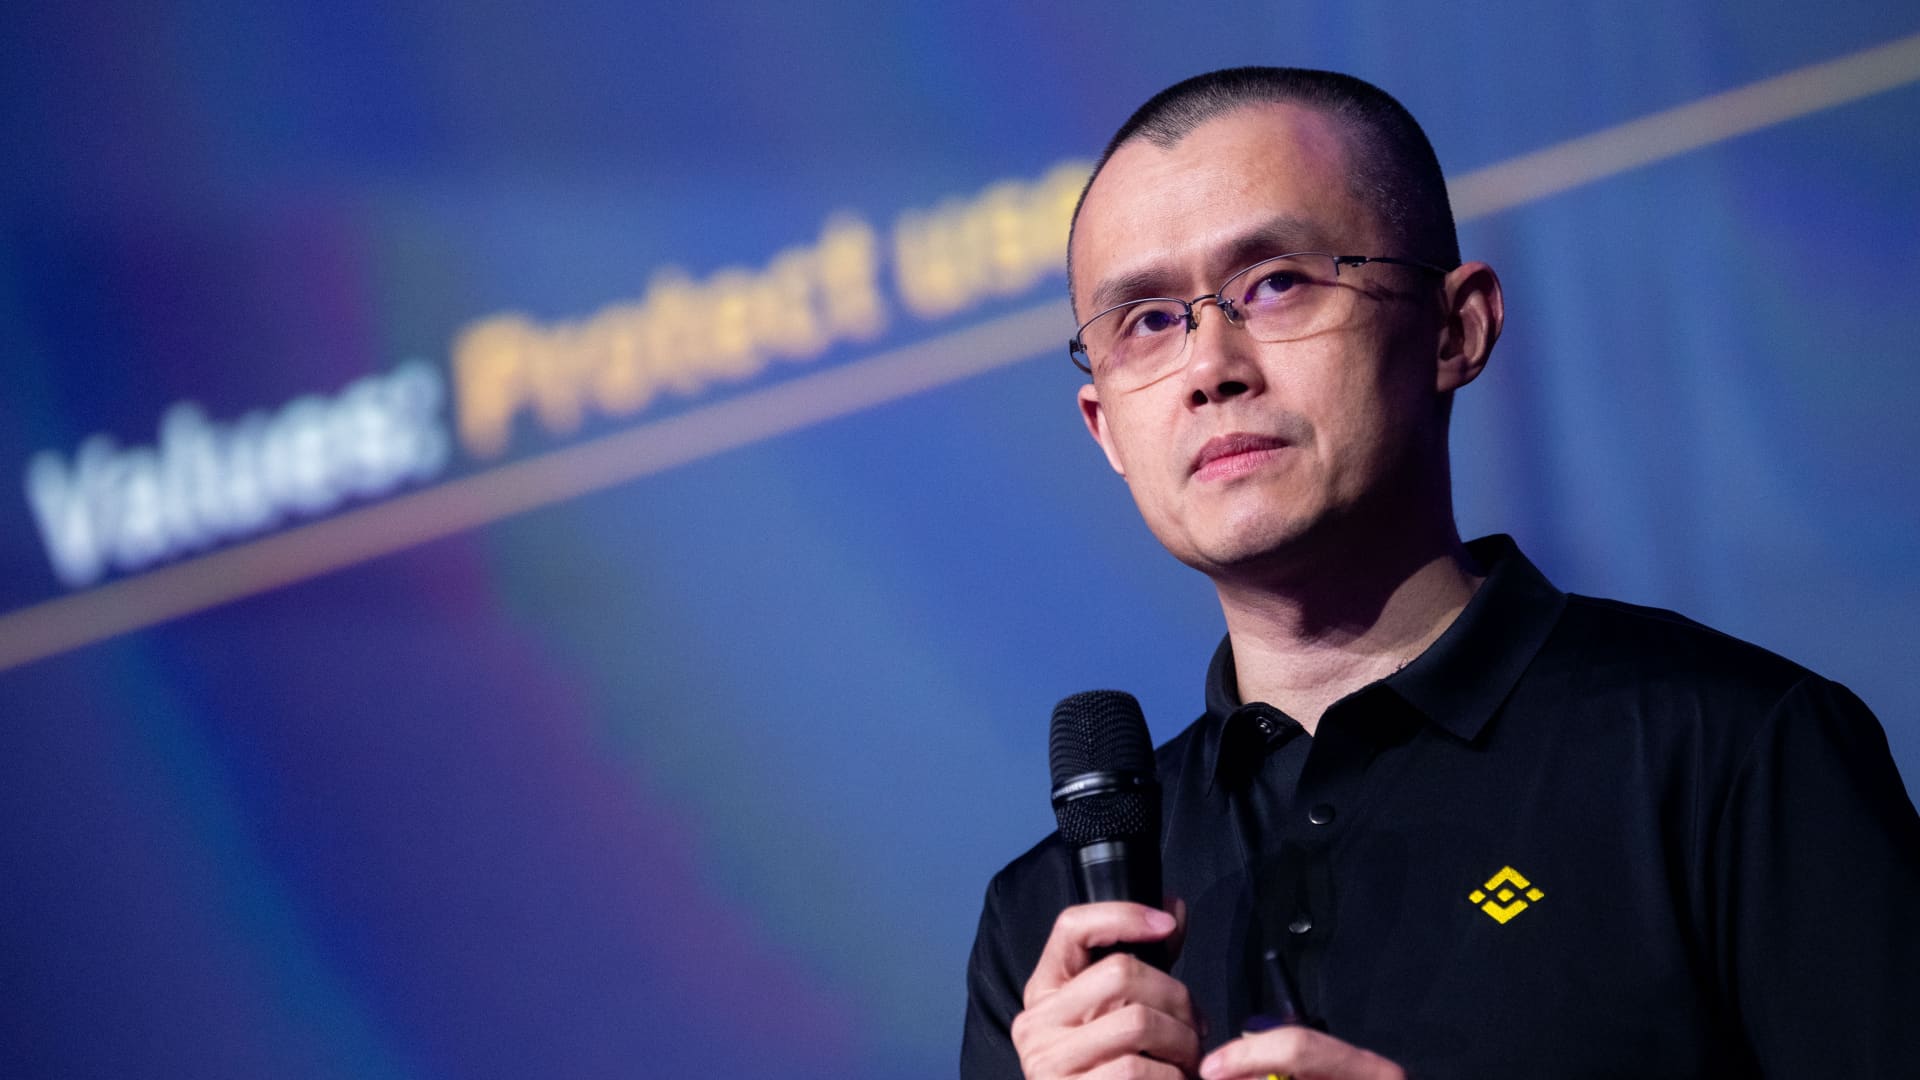 Binance CEO Changpeng Zhao pleads guilty to federal charges, steps down